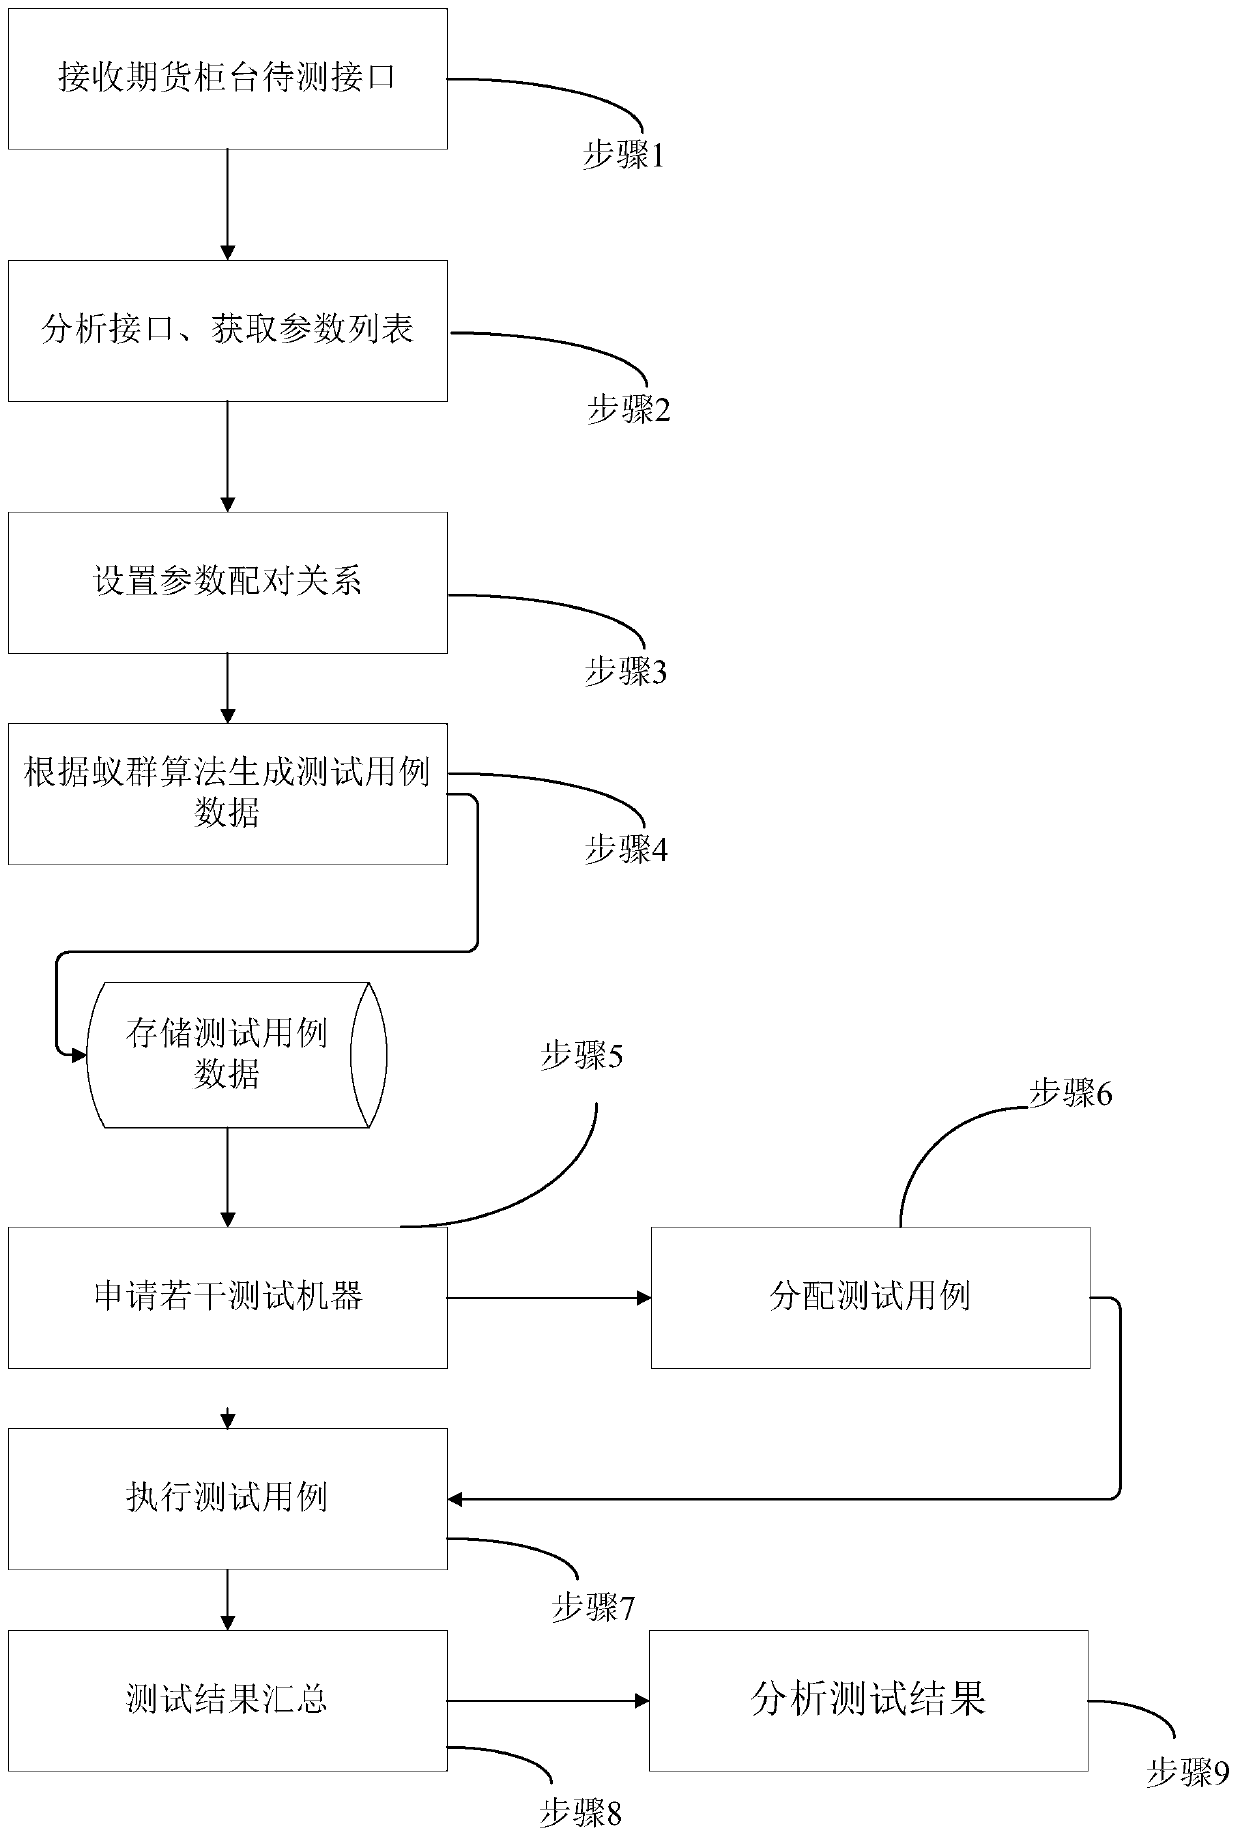 Automatic test method and simulator for financial transaction platform